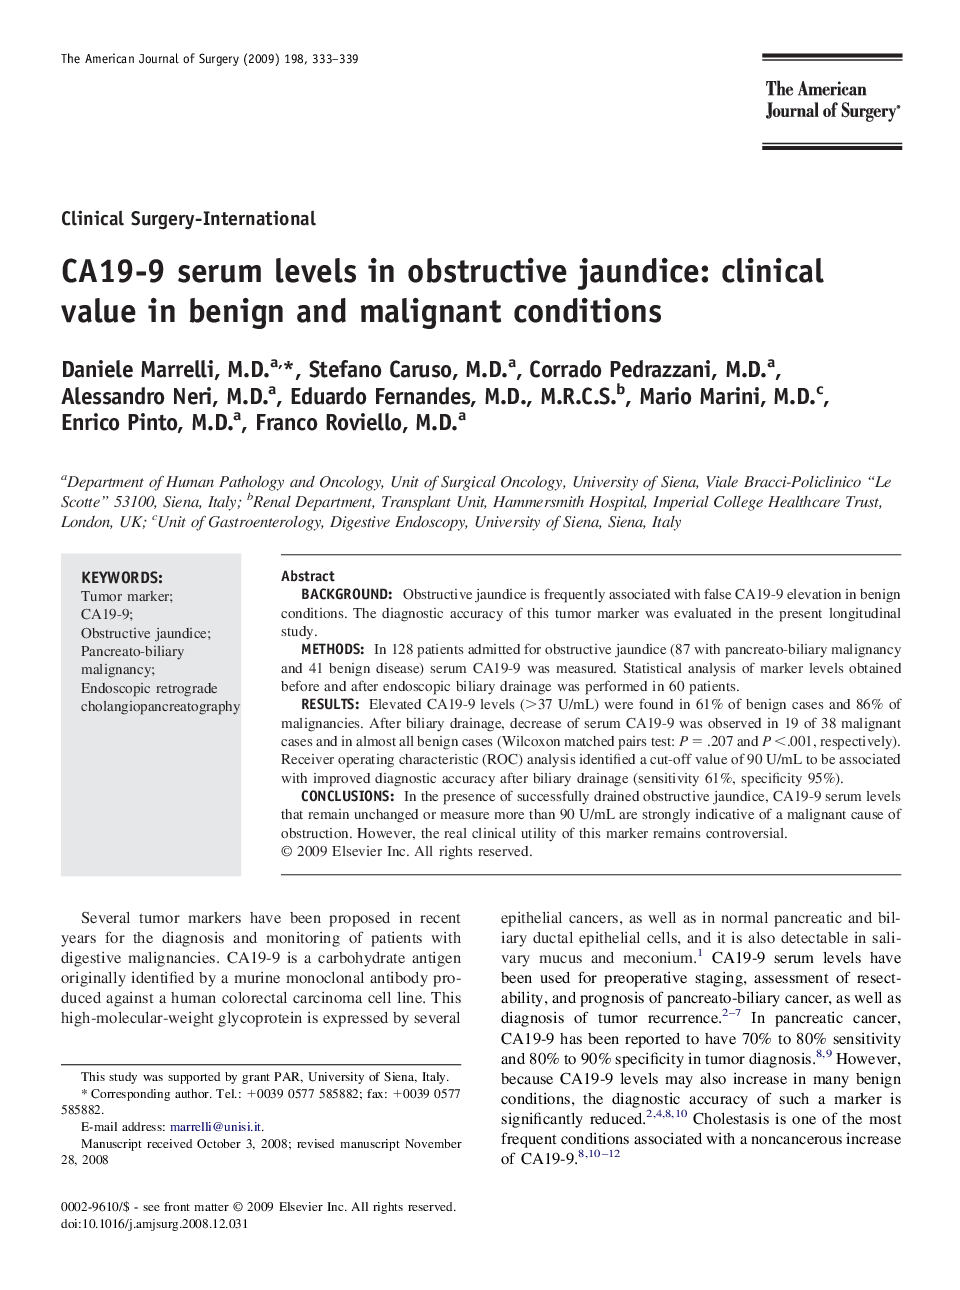 CA19-9 serum levels in obstructive jaundice: clinical value in benign and malignant conditions 